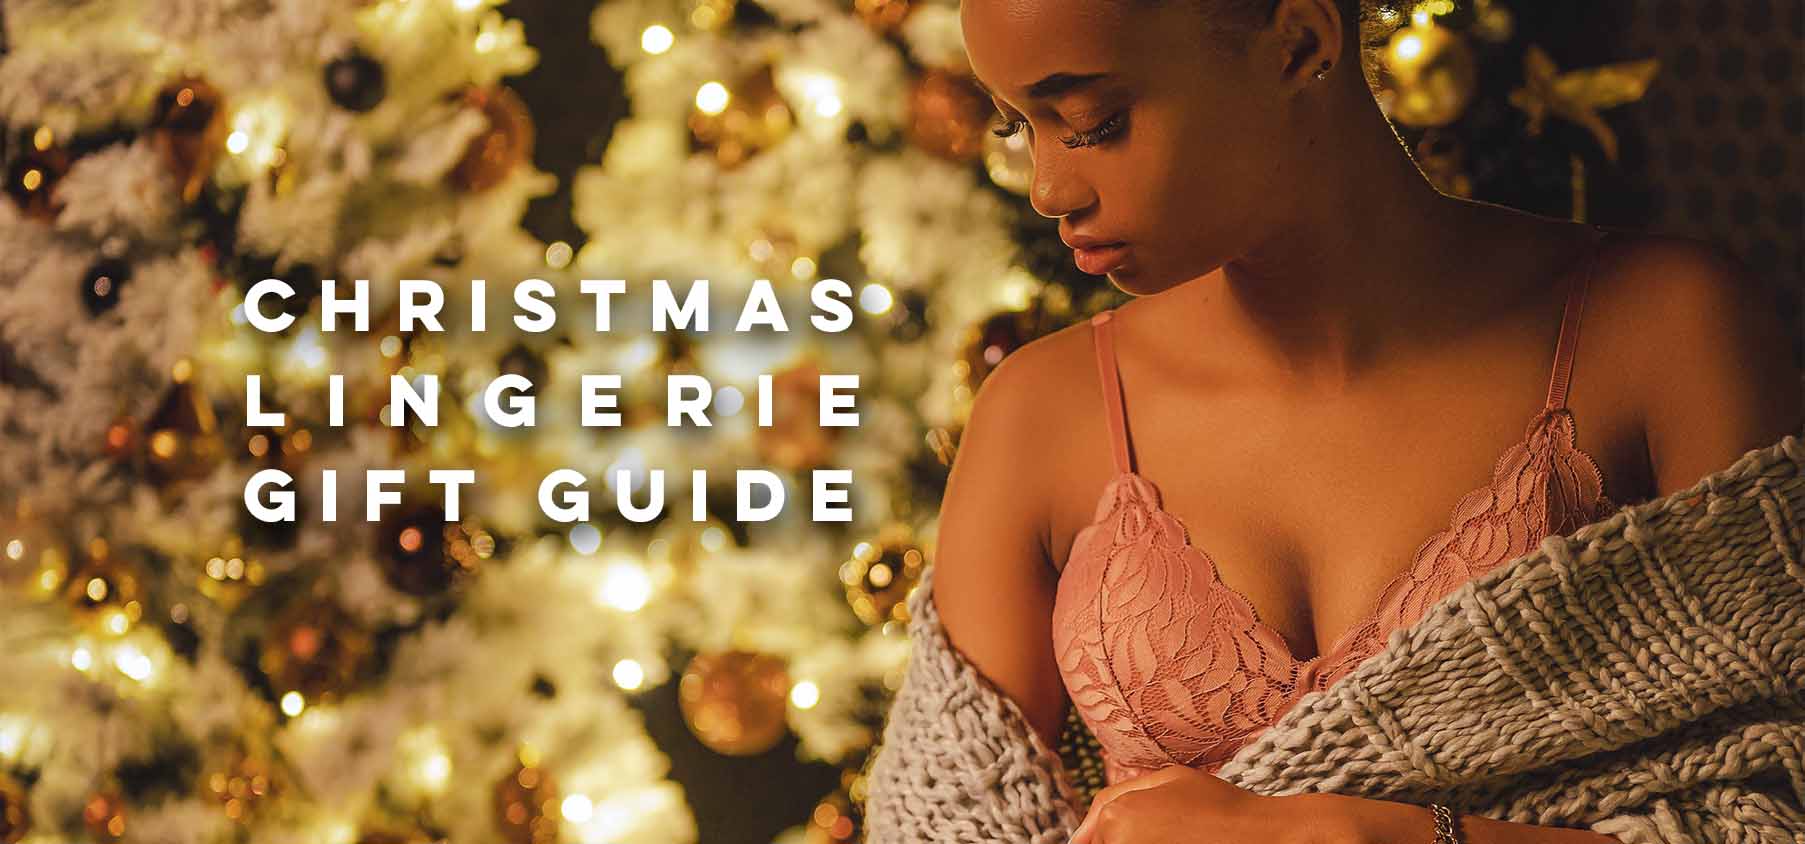 Woman wearing lingerie in front of christmas tree